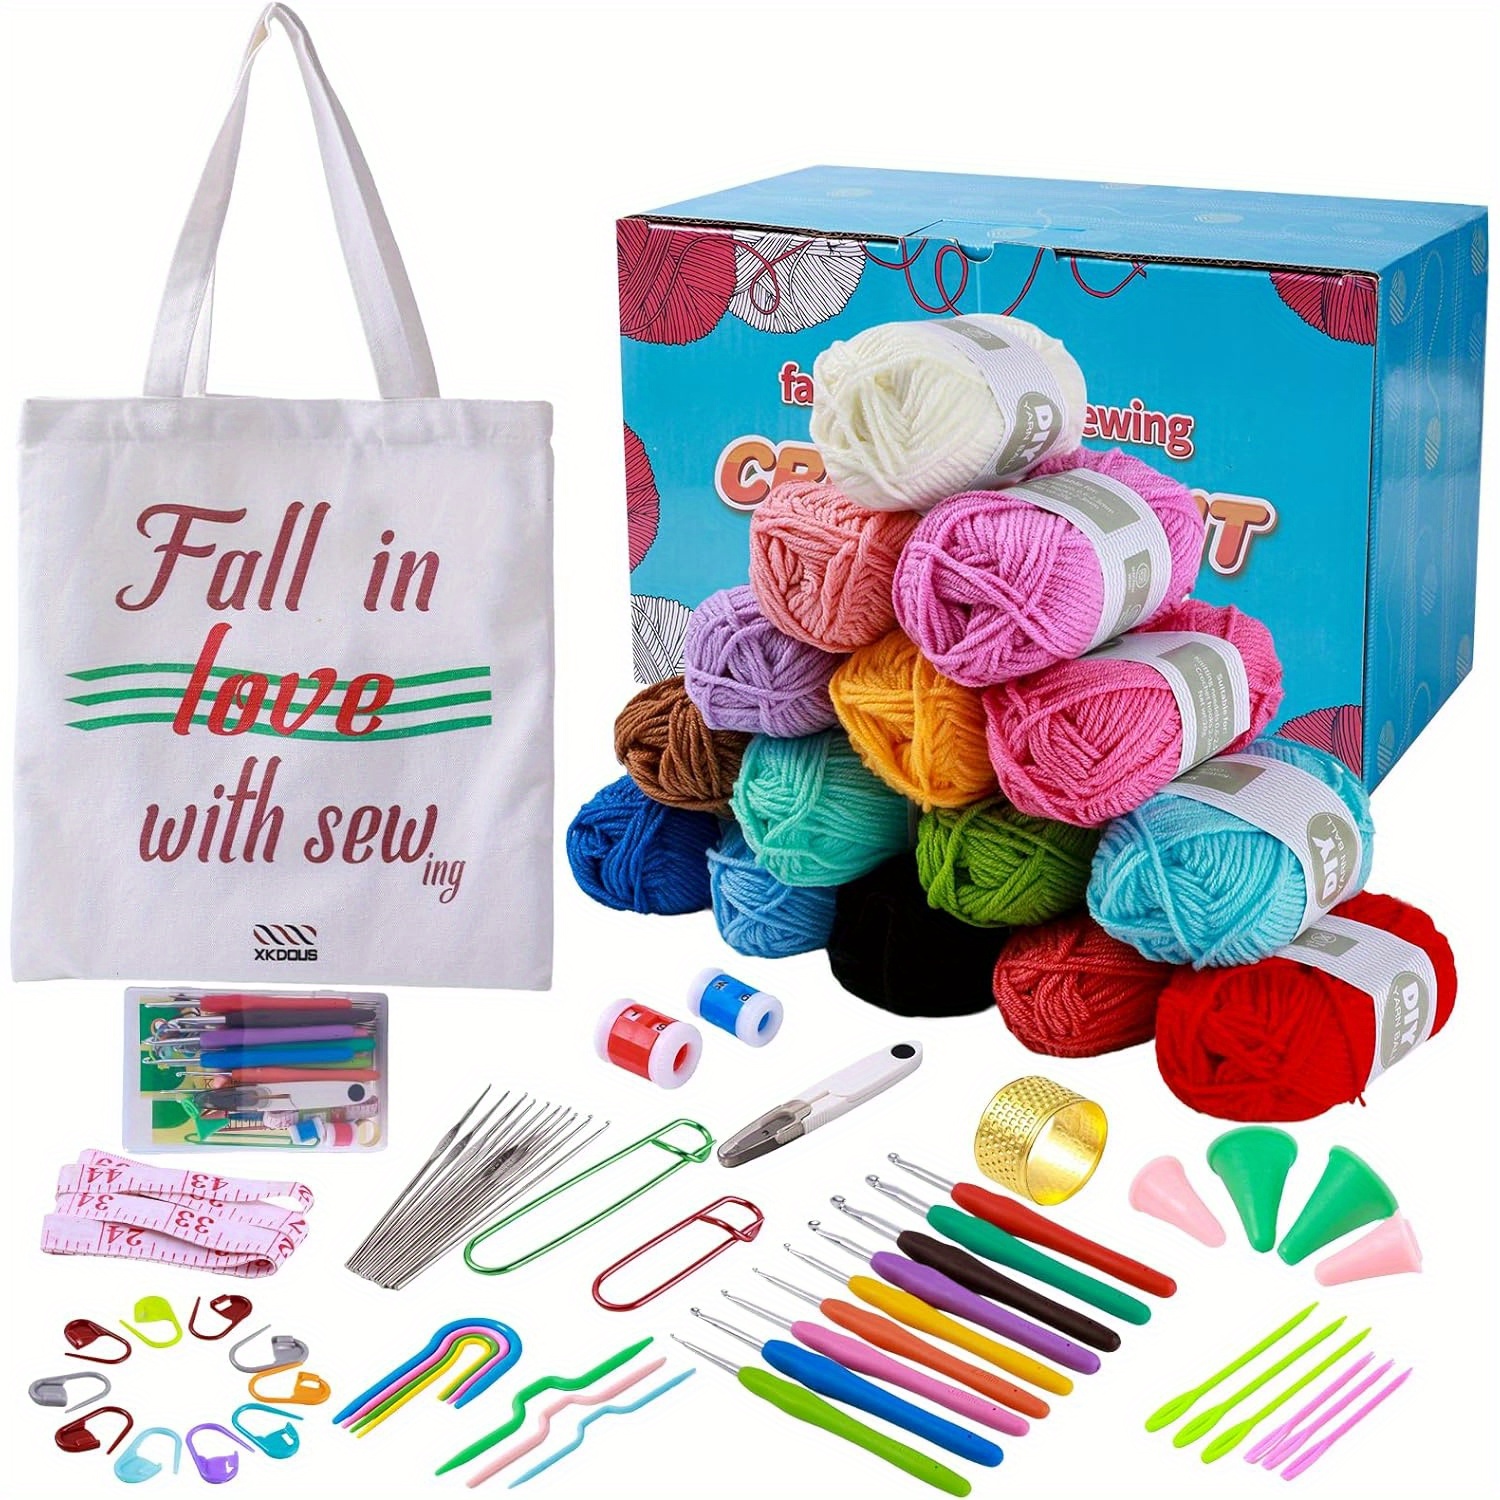 

70 Piece Crochet Kit For Beginners Adults, Crochet Kits For Beginner, Beginner Knitting Kit With Yarn And Accessories